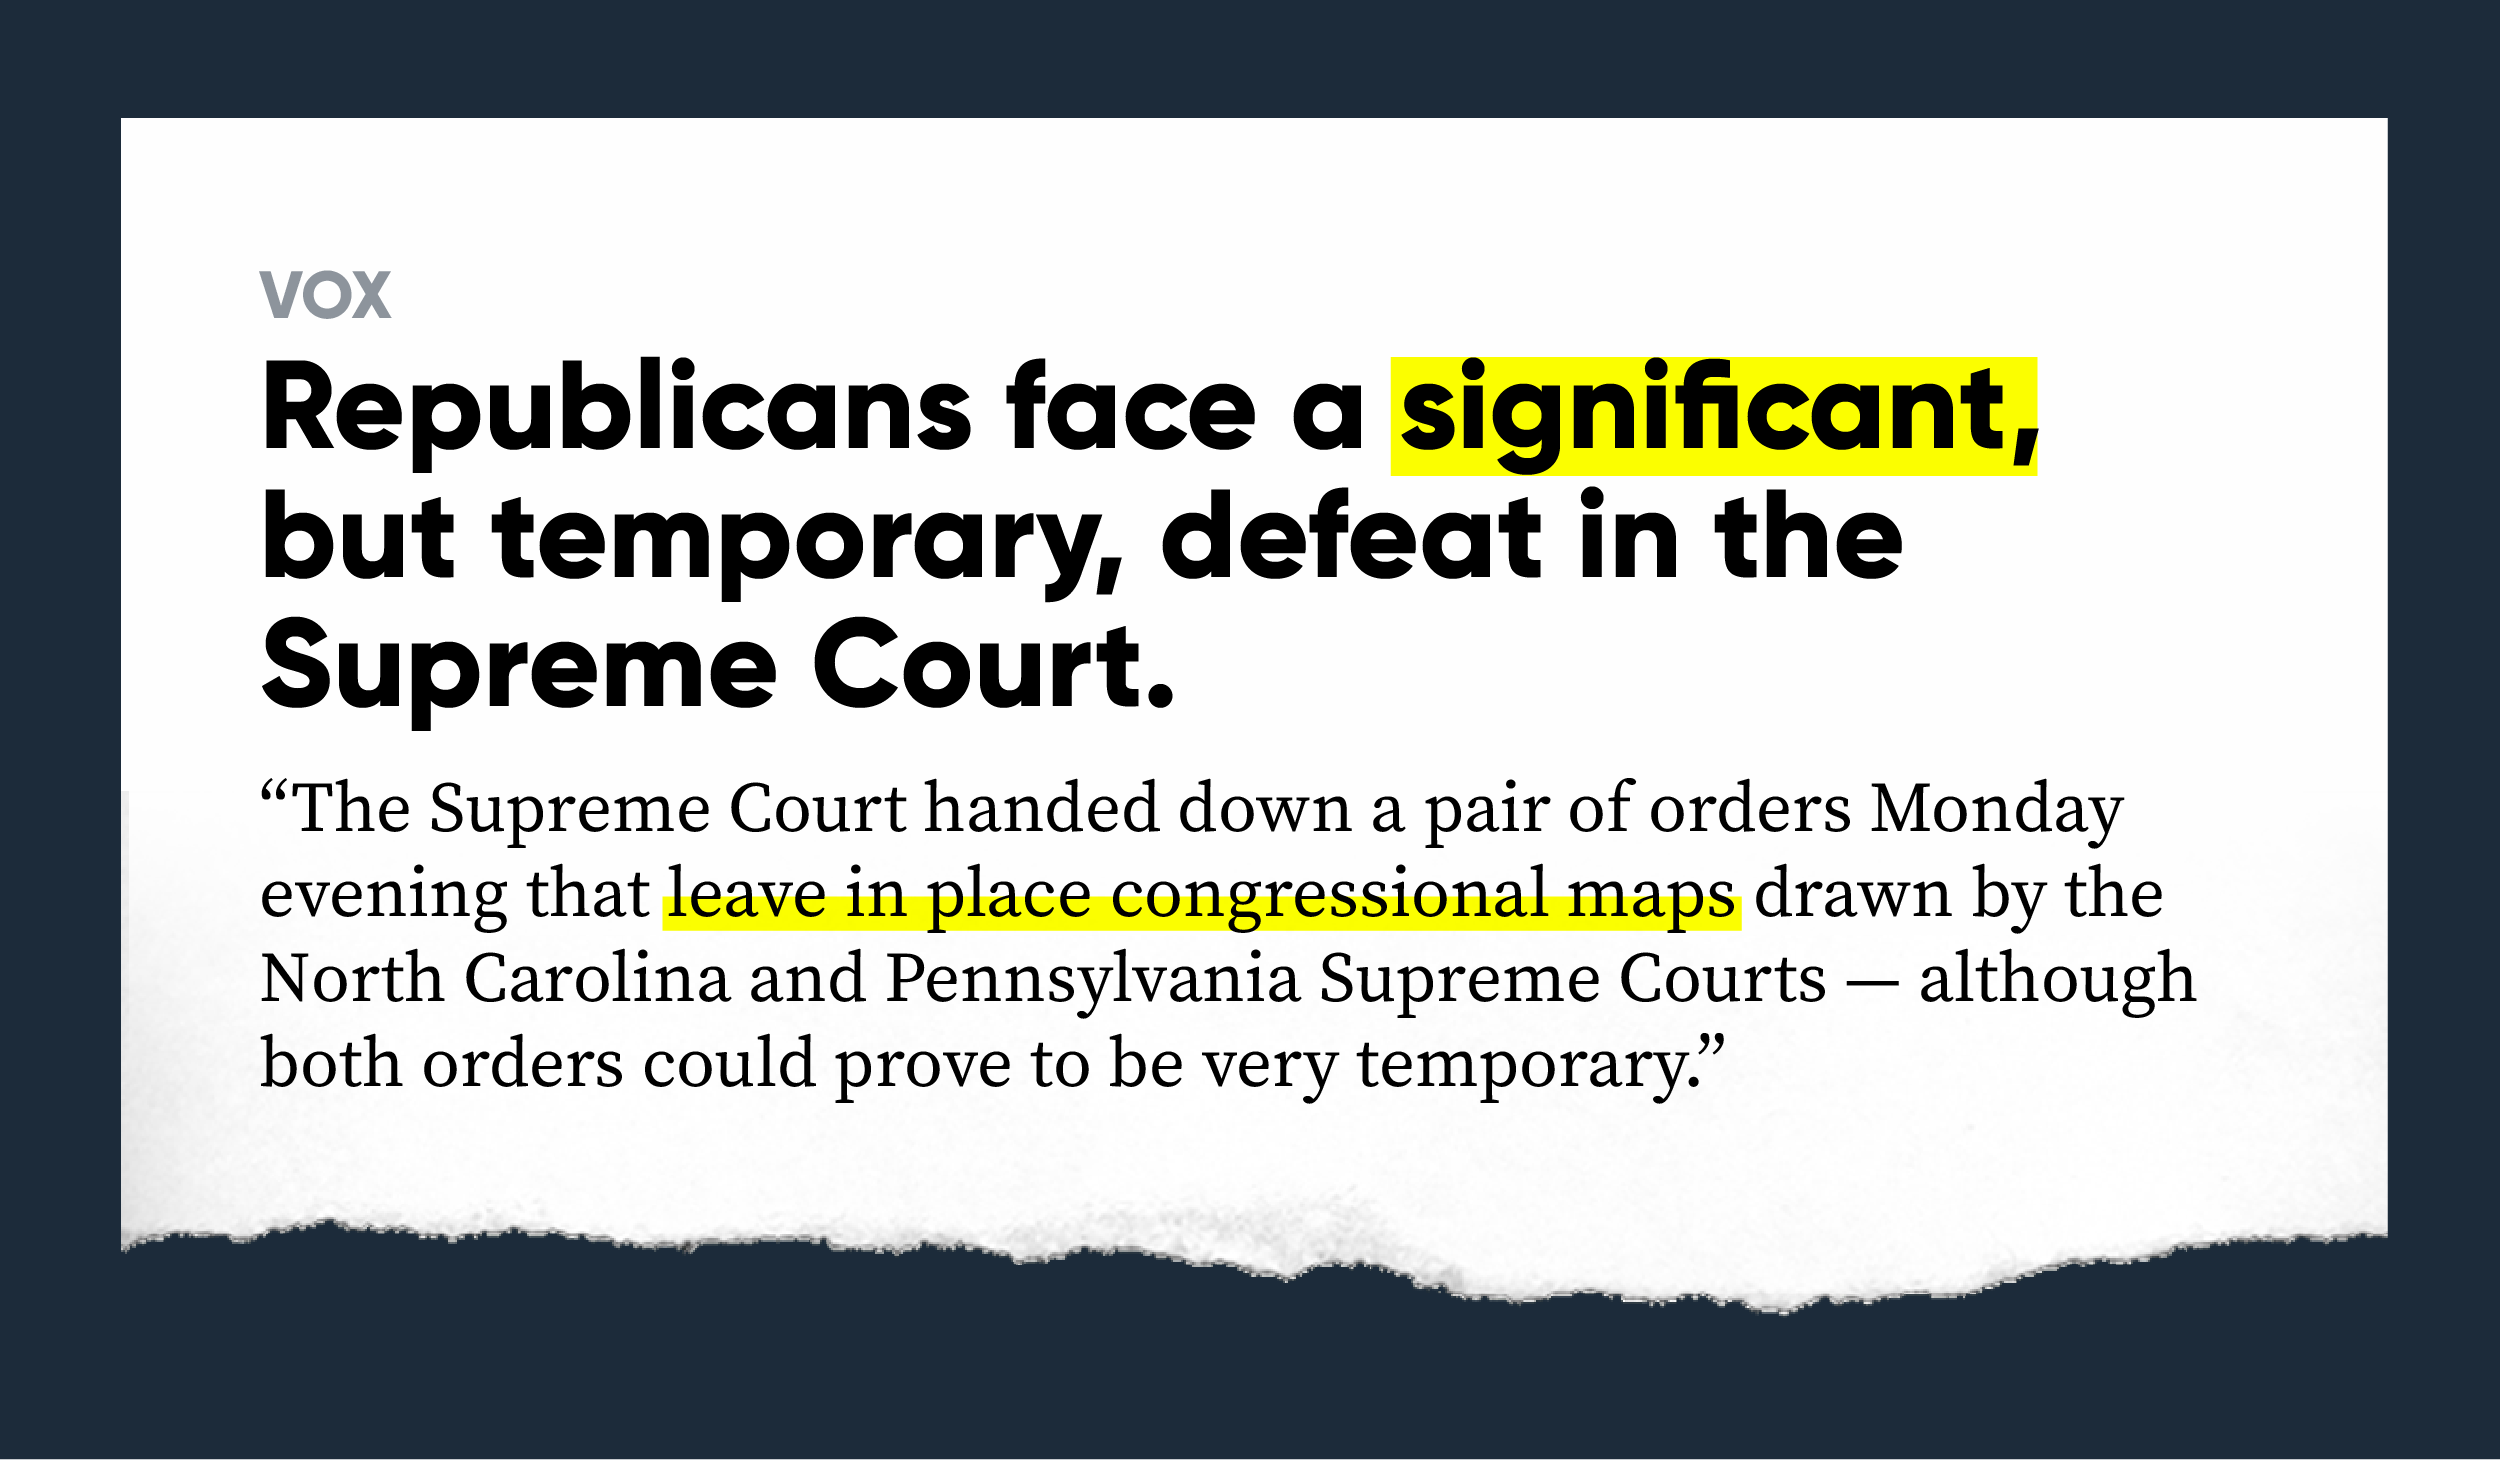 VOX: Republicans face a significant, but temporary, defeat in the Supreme Court -- The Supreme Court handed down a pair of orders Monday evening that leave in place congressional maps drawn by the North Carolina and Pennsylvania Supreme Courts — although both orders could prove to be very temporary.”